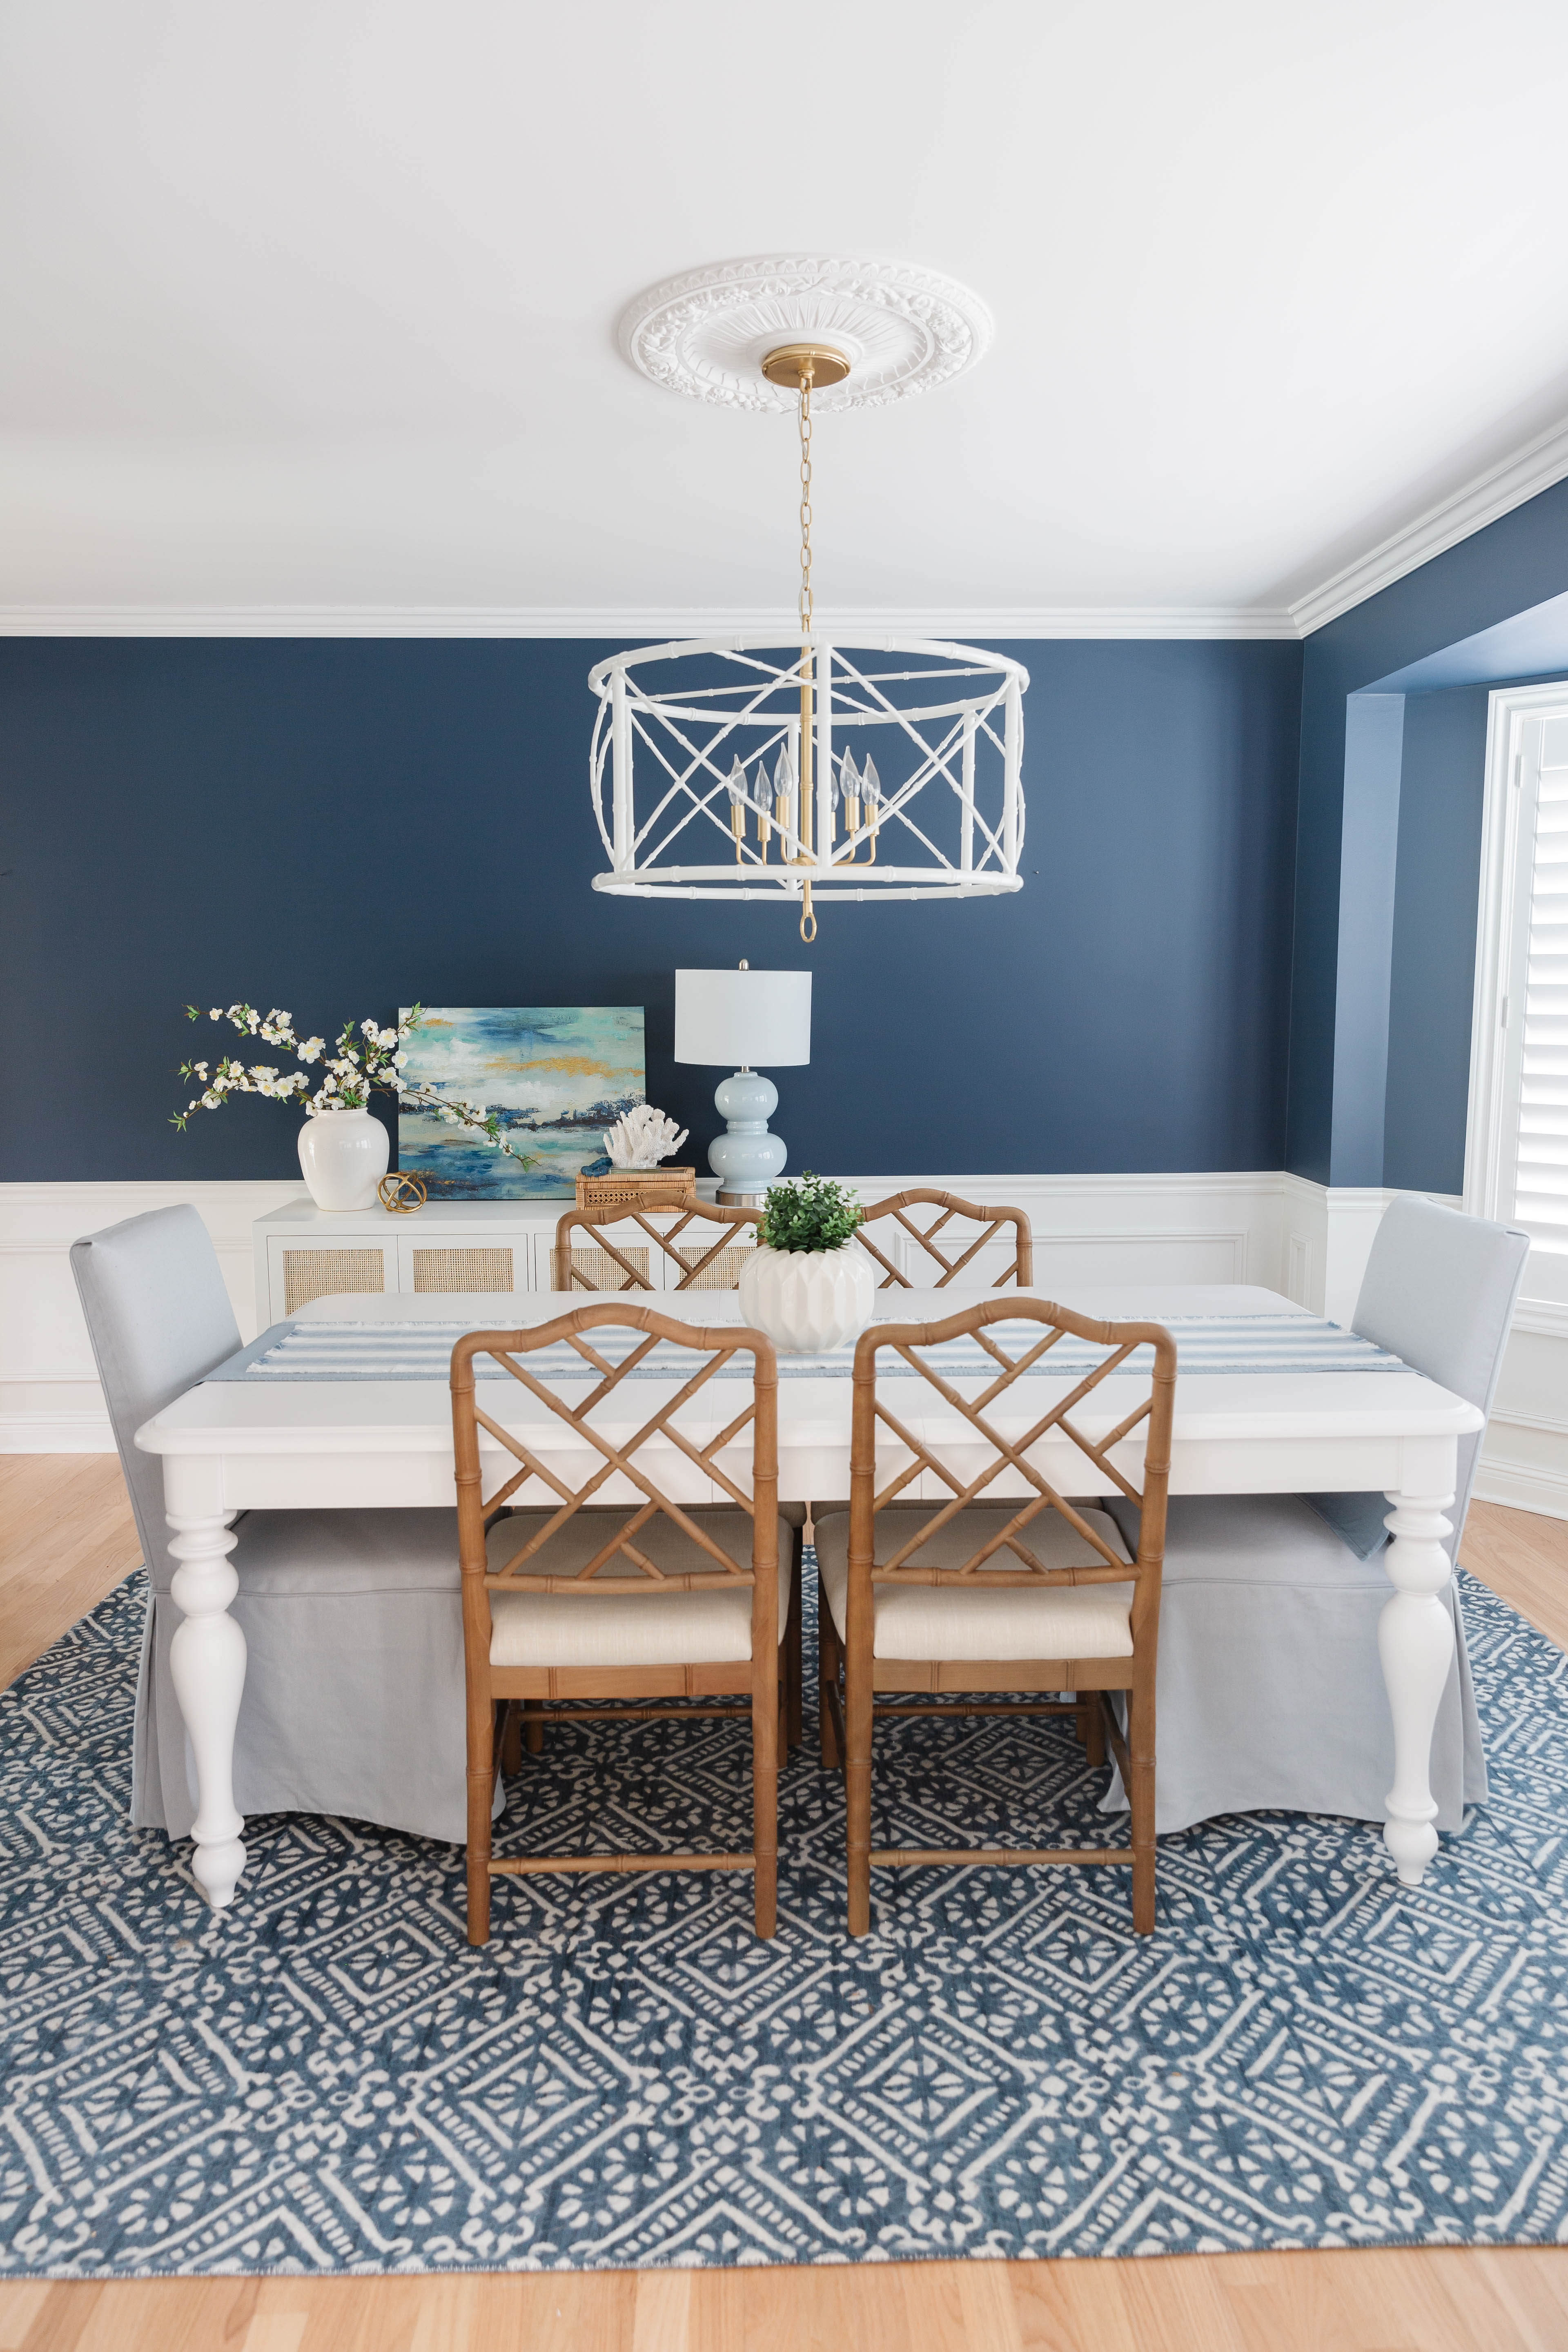 Our Navy Blue Dining Room | Newport Lane